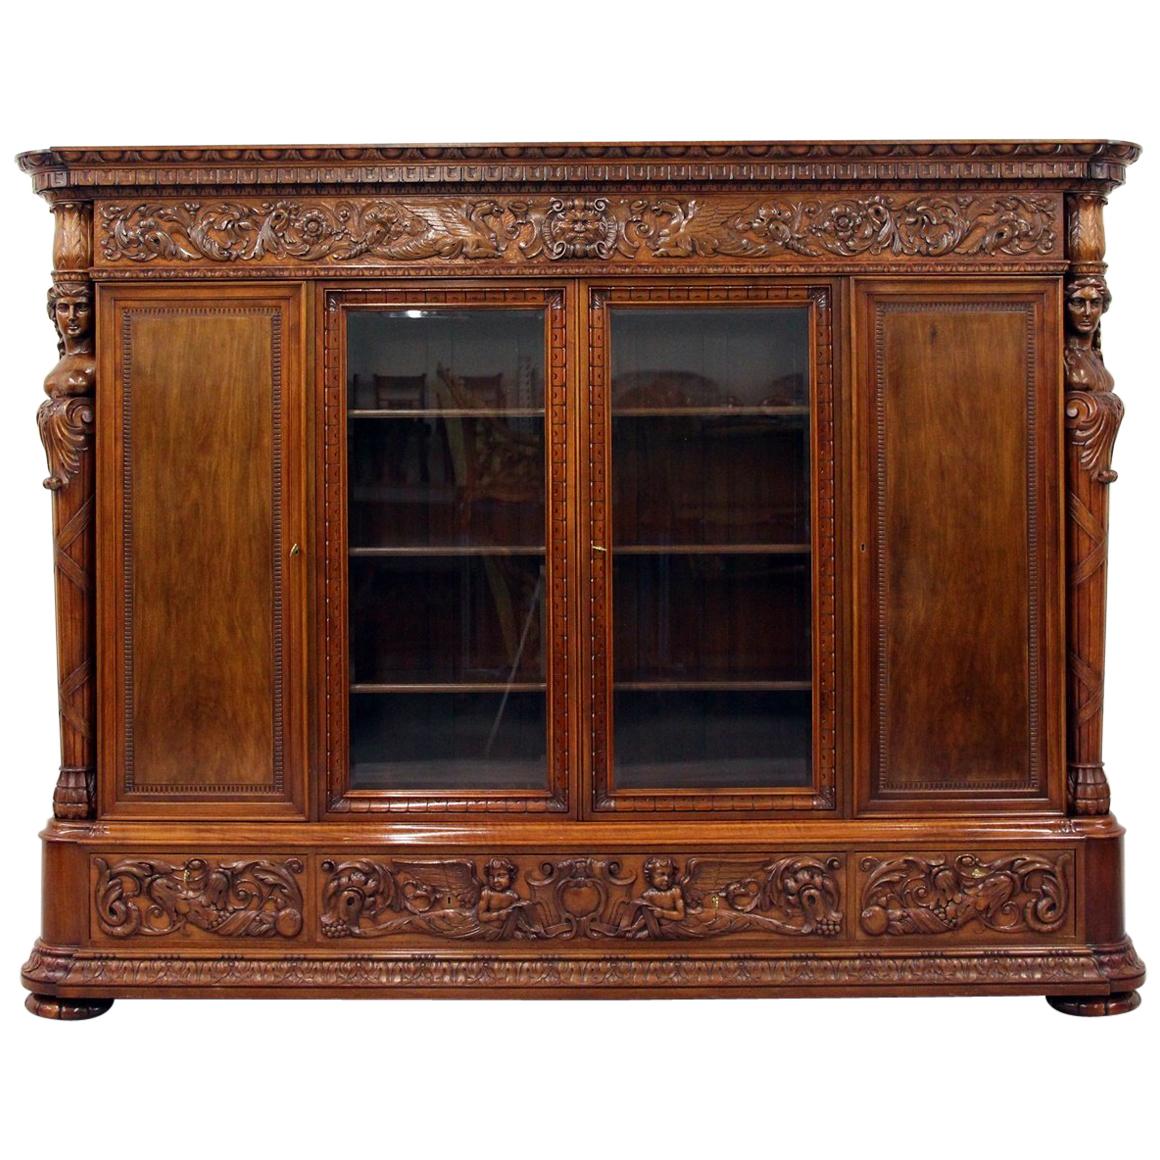 Herrenzimmer Cupboard Bookcase Antique Table Showcase Figurines For Sale